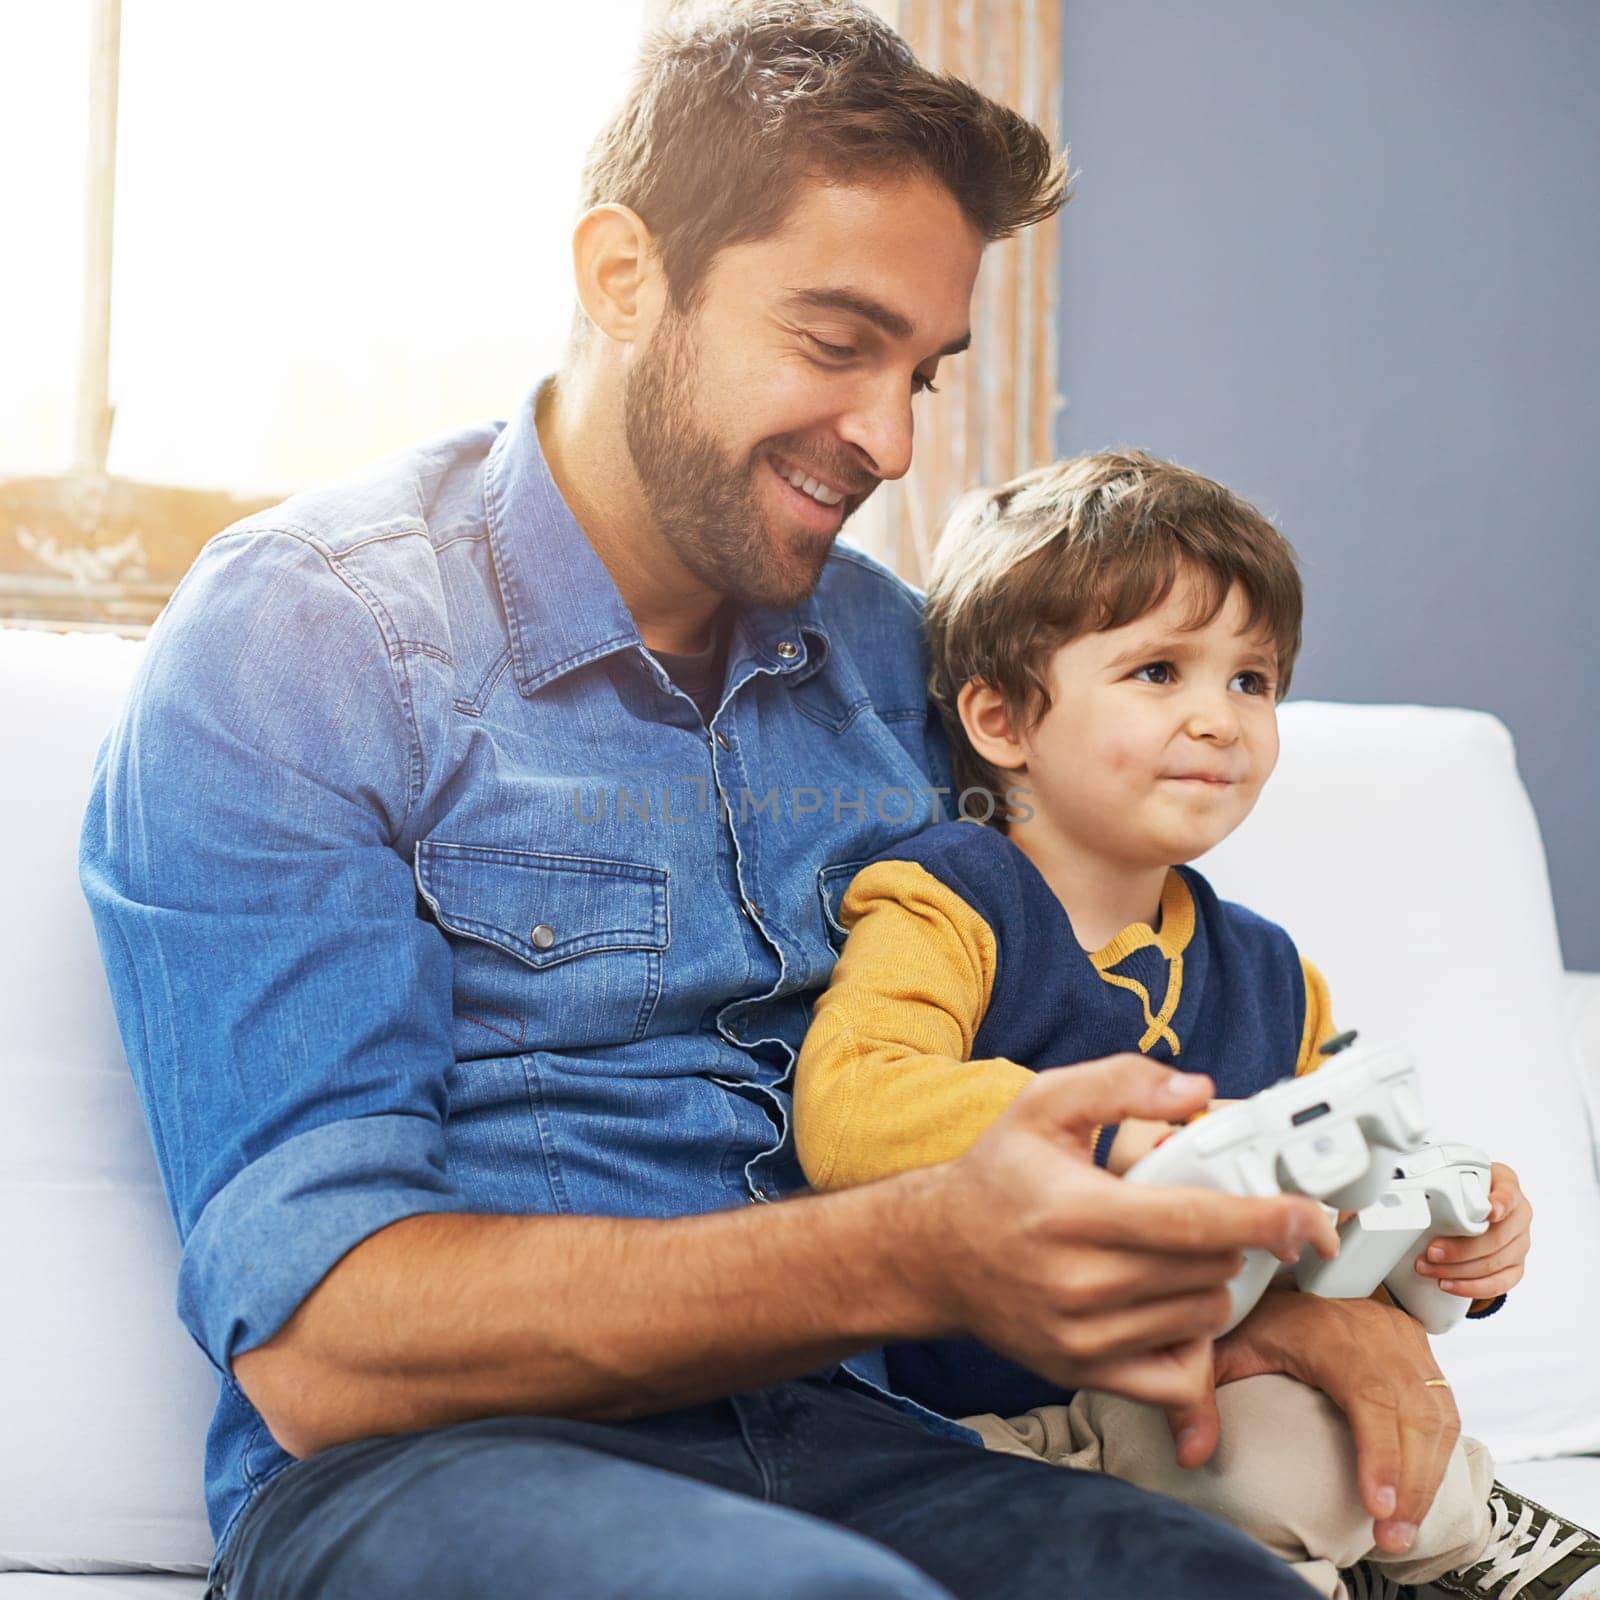 Love, father and son with video game, happiness and gaming at home, loving or smile. Family, male parent or dad with a kid, boy or child with technology, bonding or quality time with games or playing by YuriArcurs